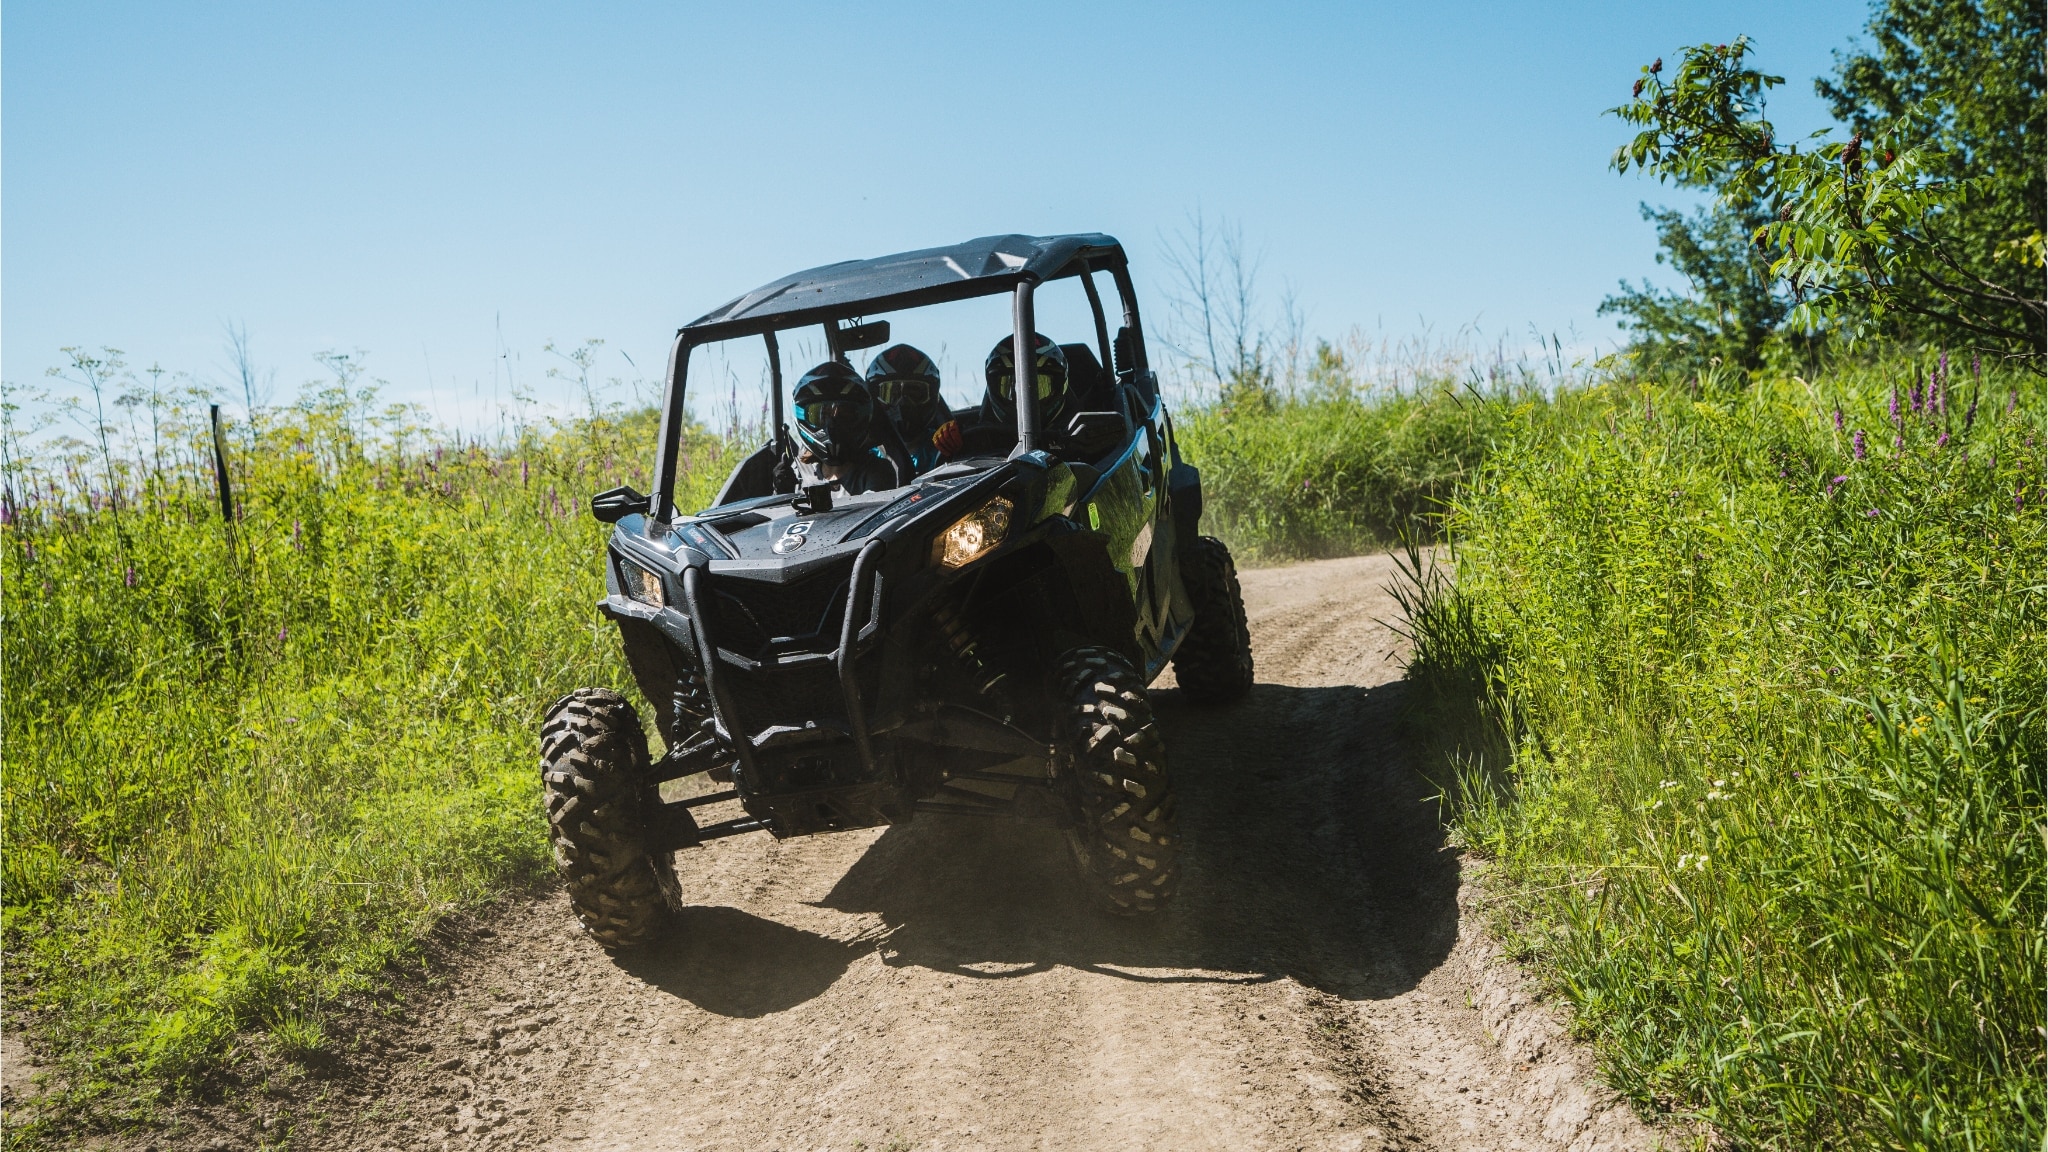 Can-Am Defender SxS riding in a field